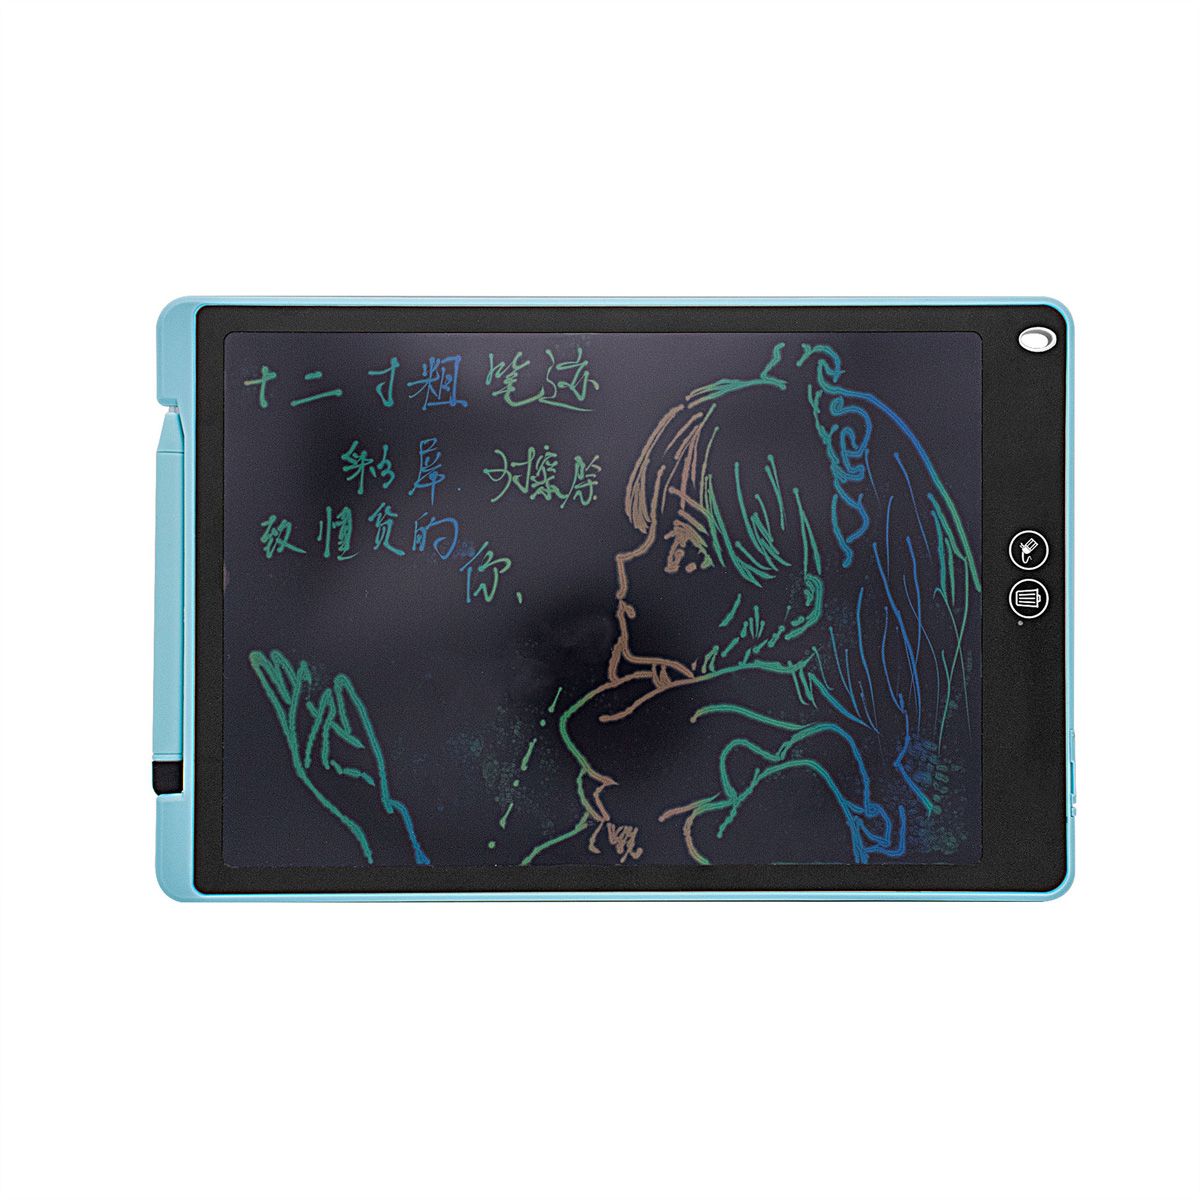 12quot-LCD-Tablet-Drawing-Writing-Board-Kid-Notepad-eWriter-Digital-Graphic-Gifts-1676074